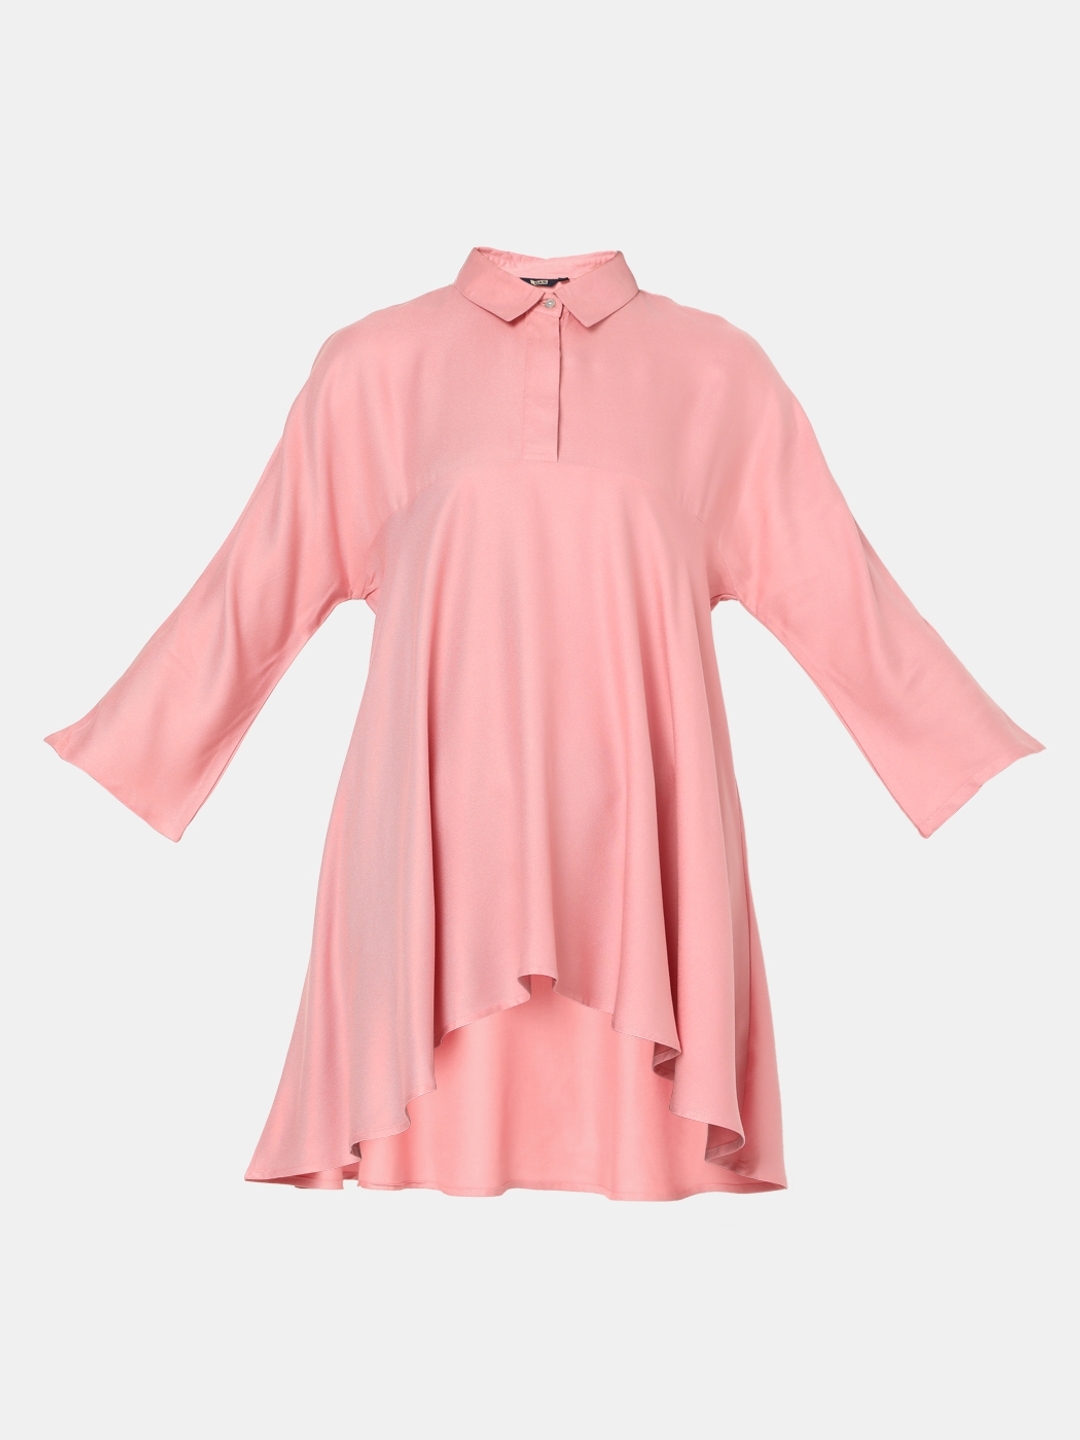 Panelled Shirt with Dipped Hemline